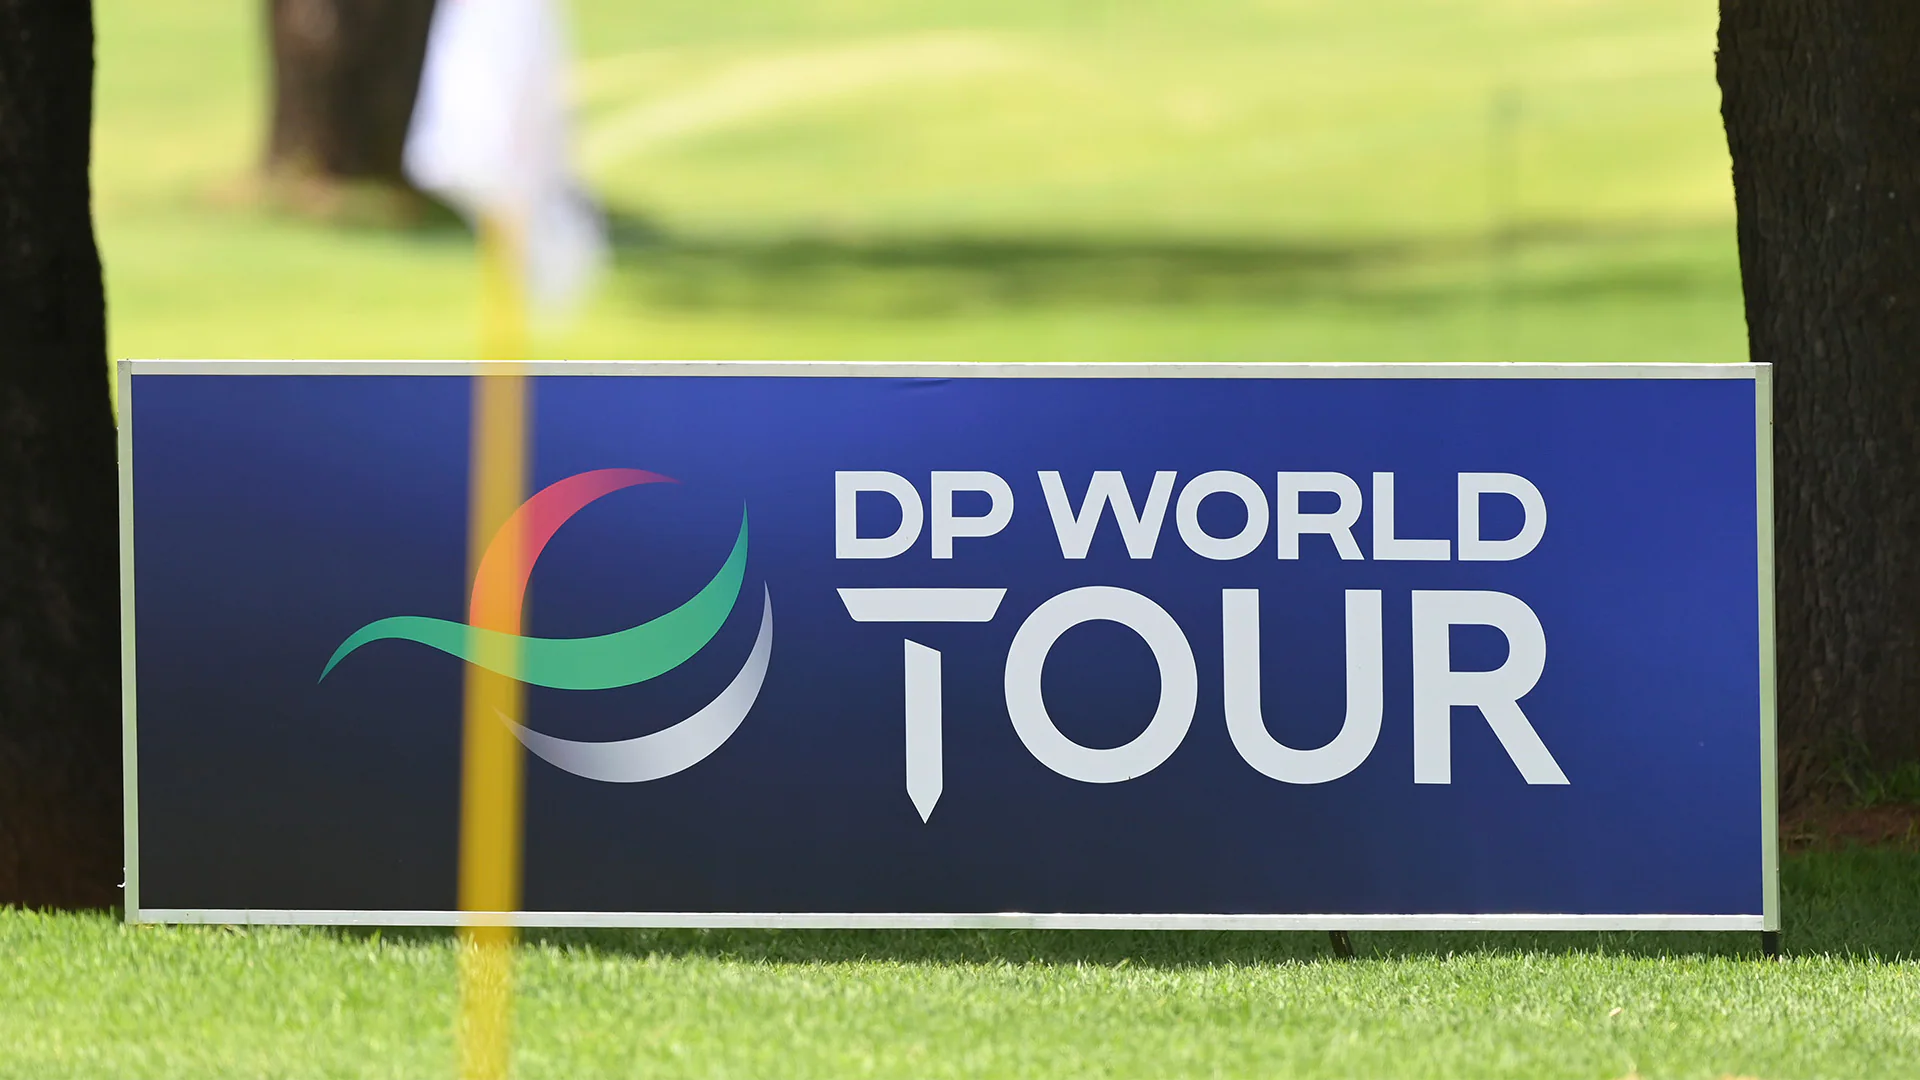 New COVID-19 variant wreaking havoc on DP World Tour’s South African swing